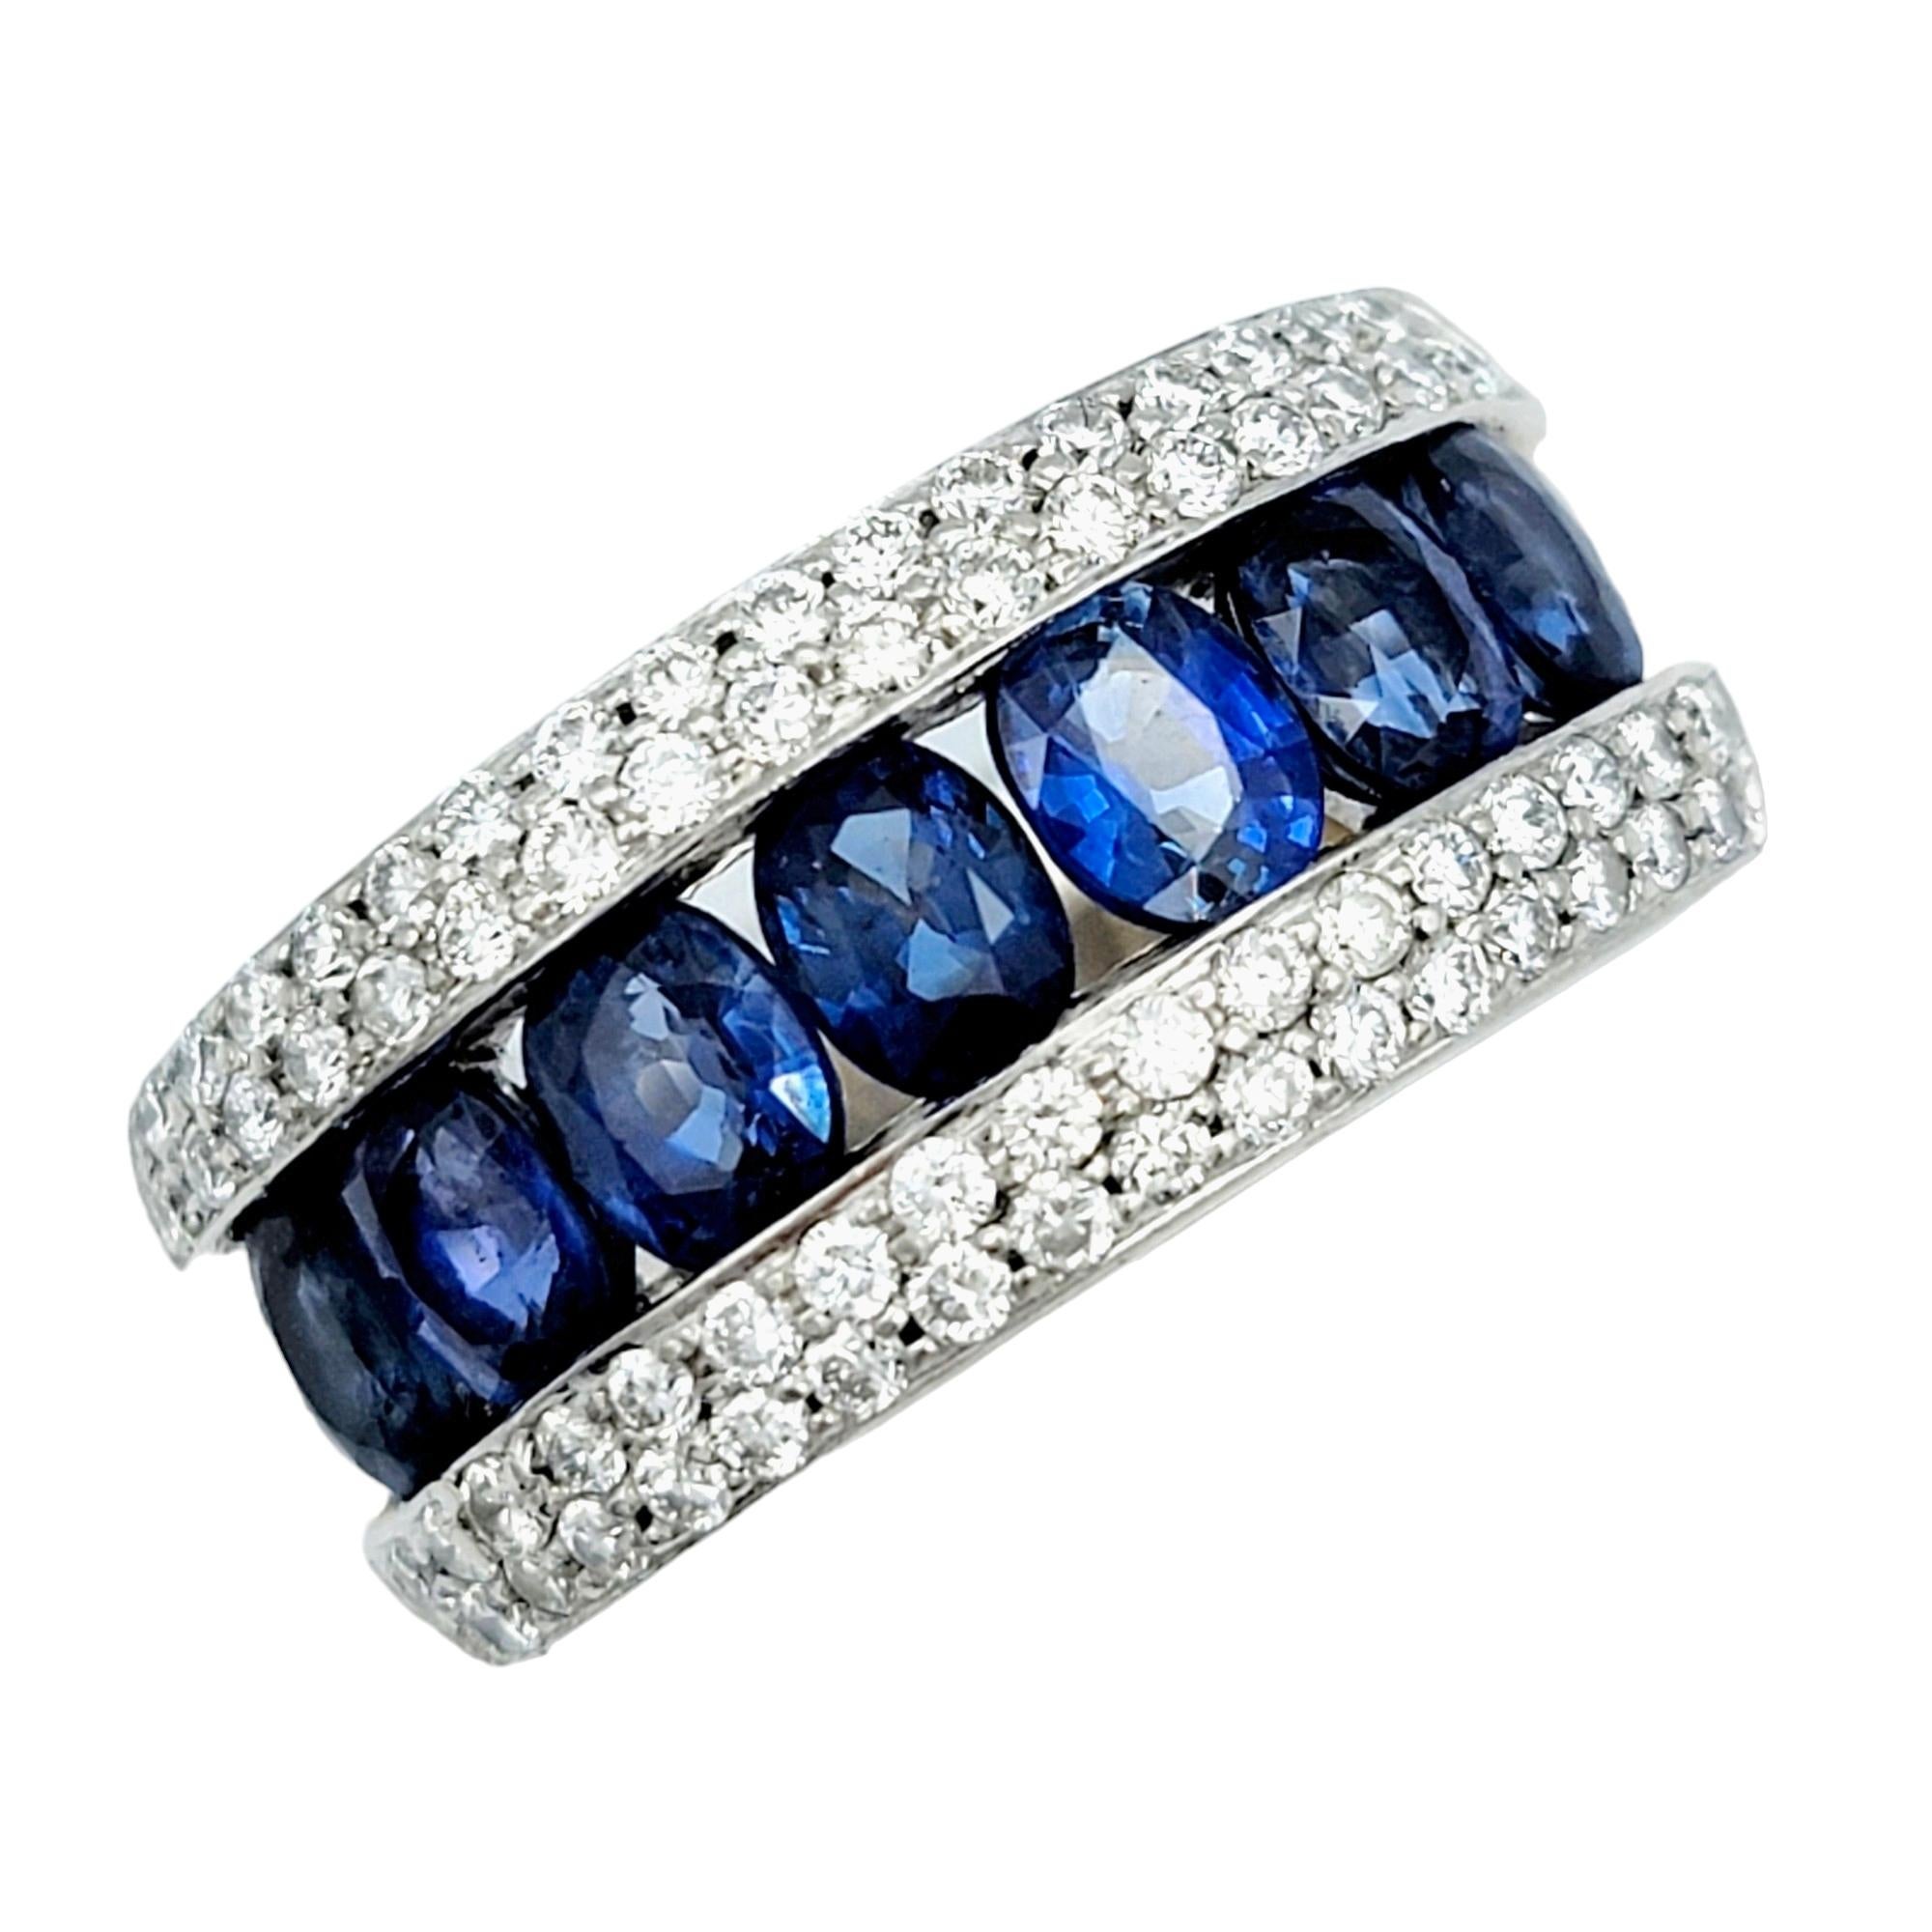 Ring Size: 6.25

This captivating band ring is a sophisticated and stunning work of art. Crafted with precision, the ring features a series of exquisite oval blue sapphires channel-set between delicate pave diamonds, creating a harmonious blend of